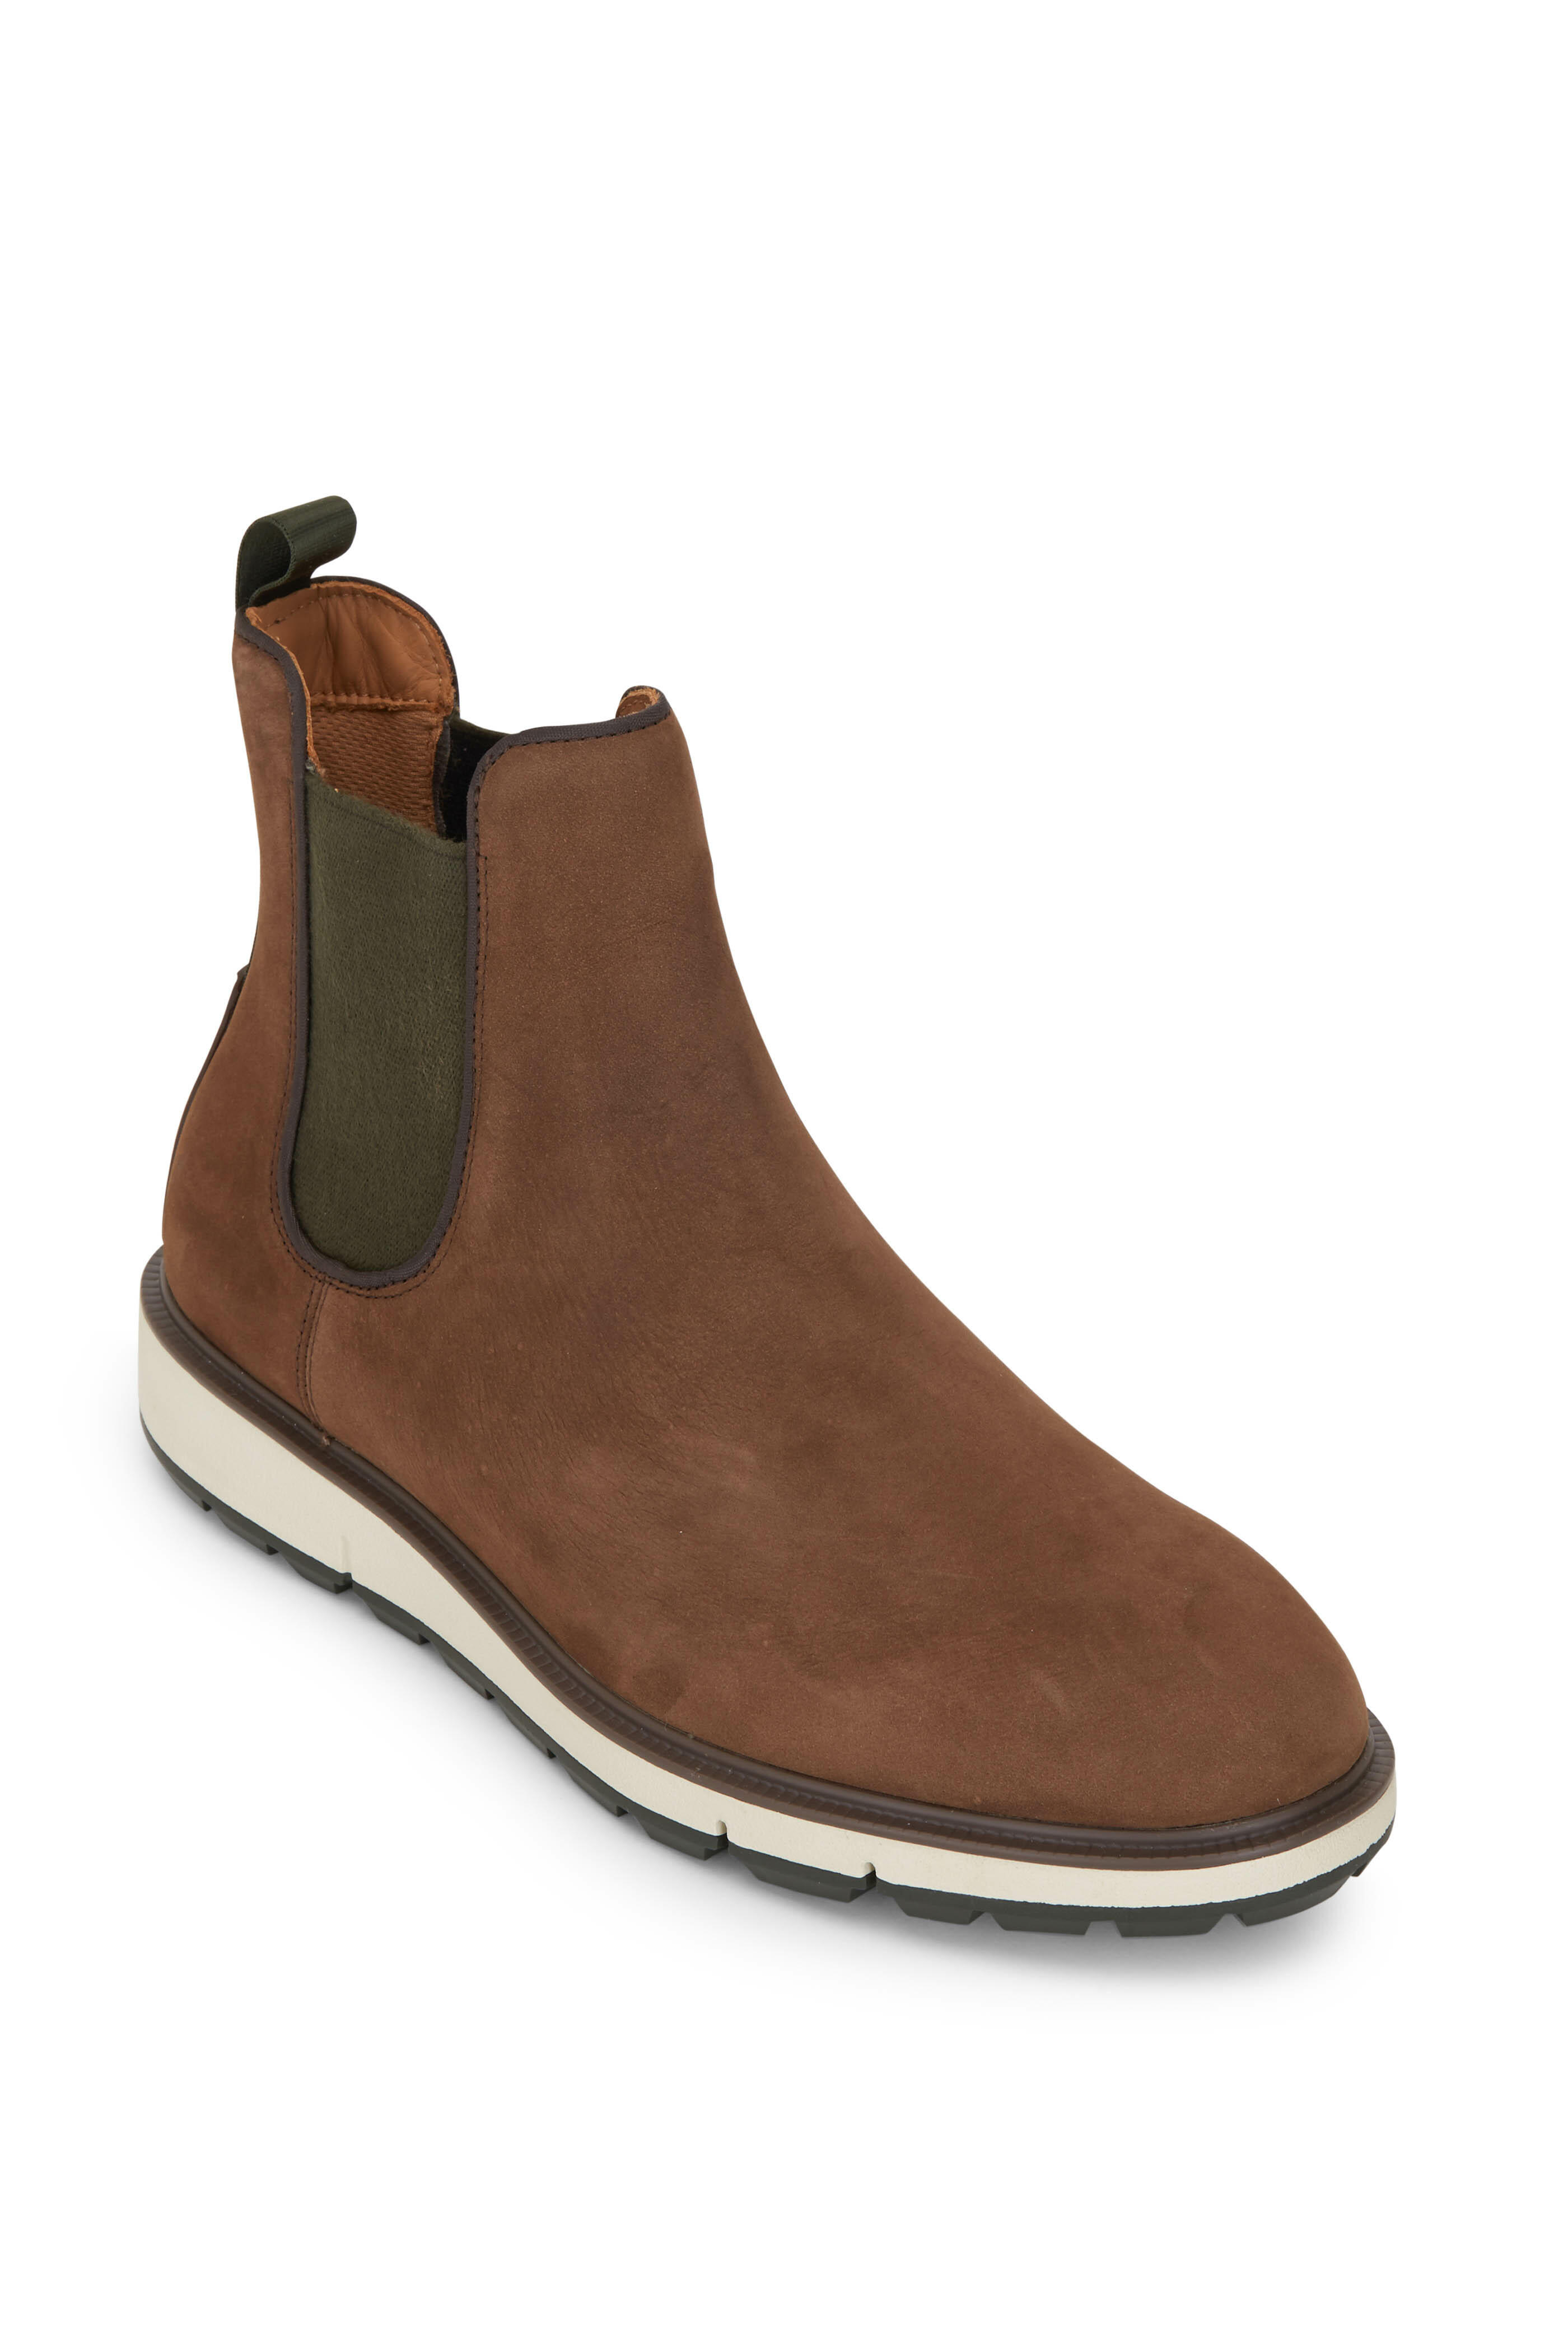 Swims - Motion Suede Chelsea Boot | Mitchell Stores